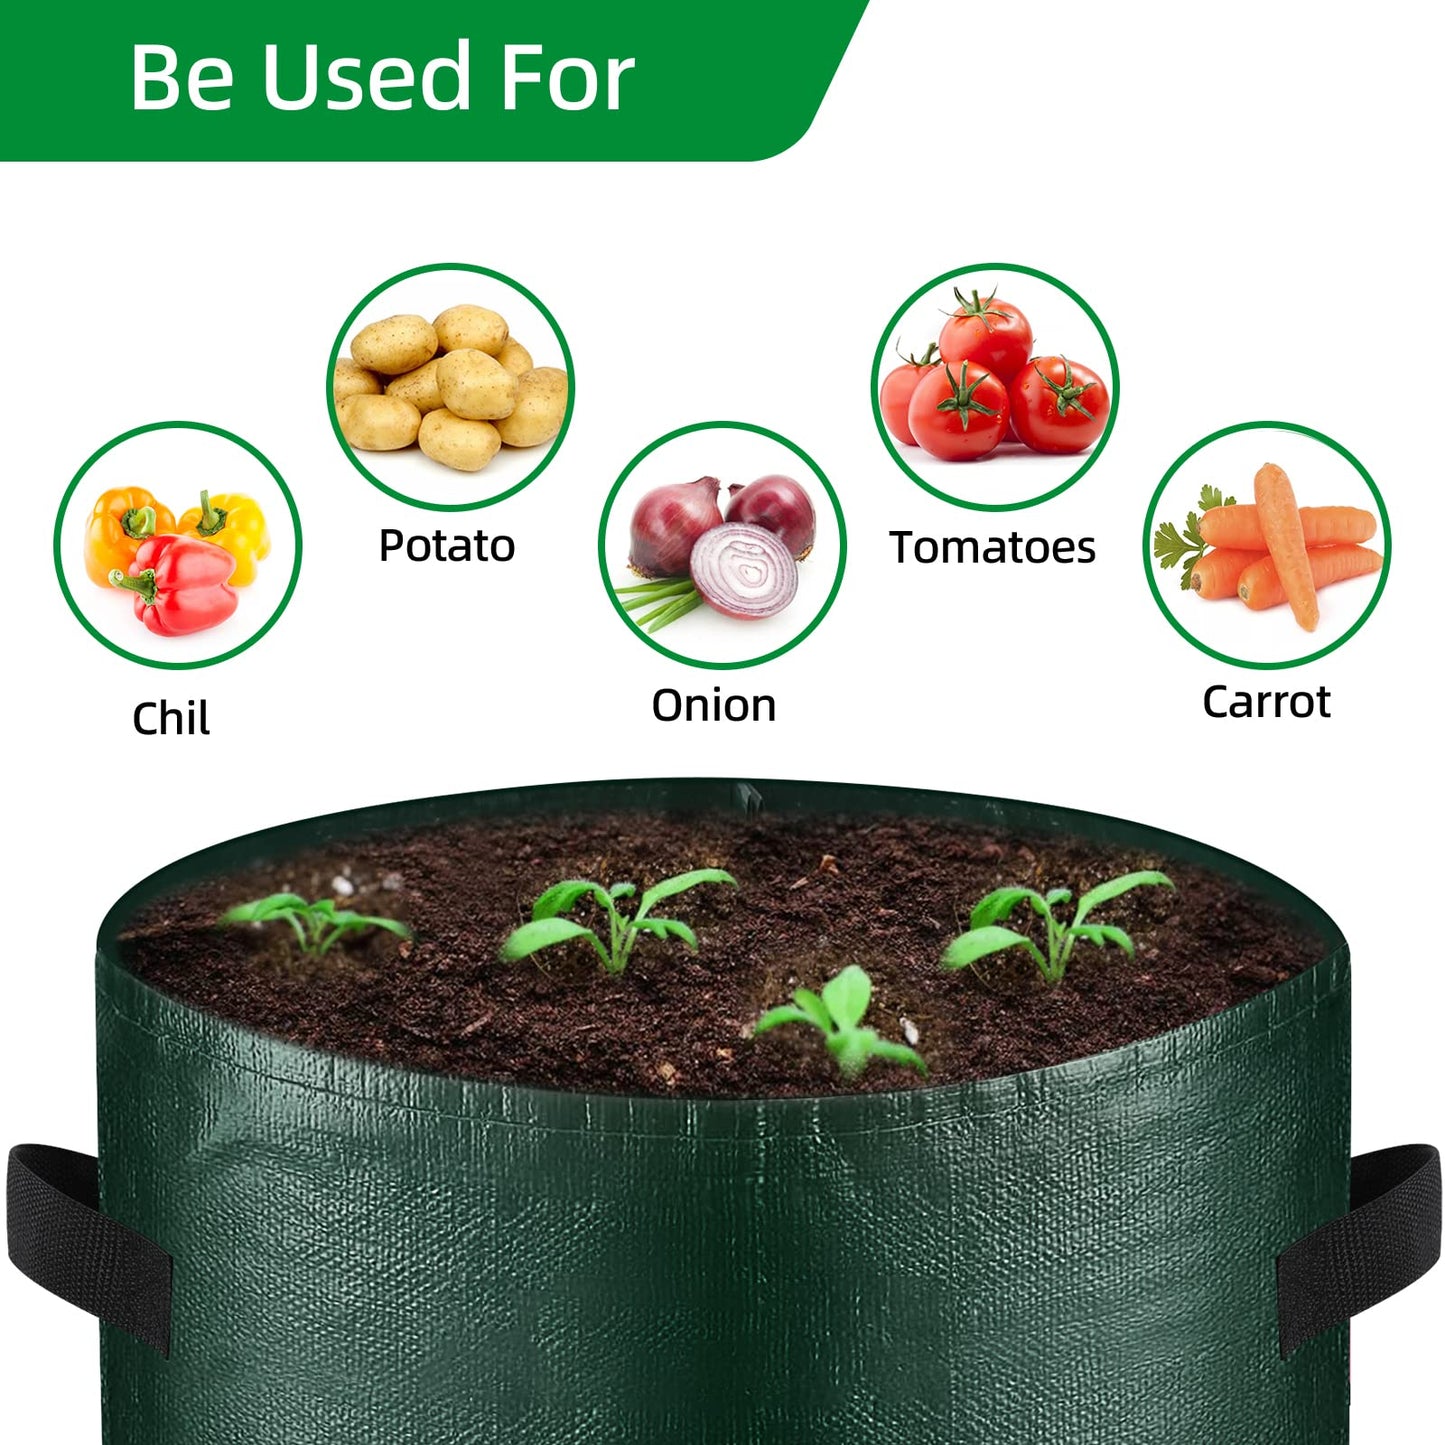 BIJOKETTEN 10 Gallon 8-Pack Grow Bags, Durable PE Fabric Pots with Flap and Handles, Green Planter Bags for Potato Vegetables Flowers Herbs Garden Outdoor, 17.7''x13.8'' Large for All Plants Growing